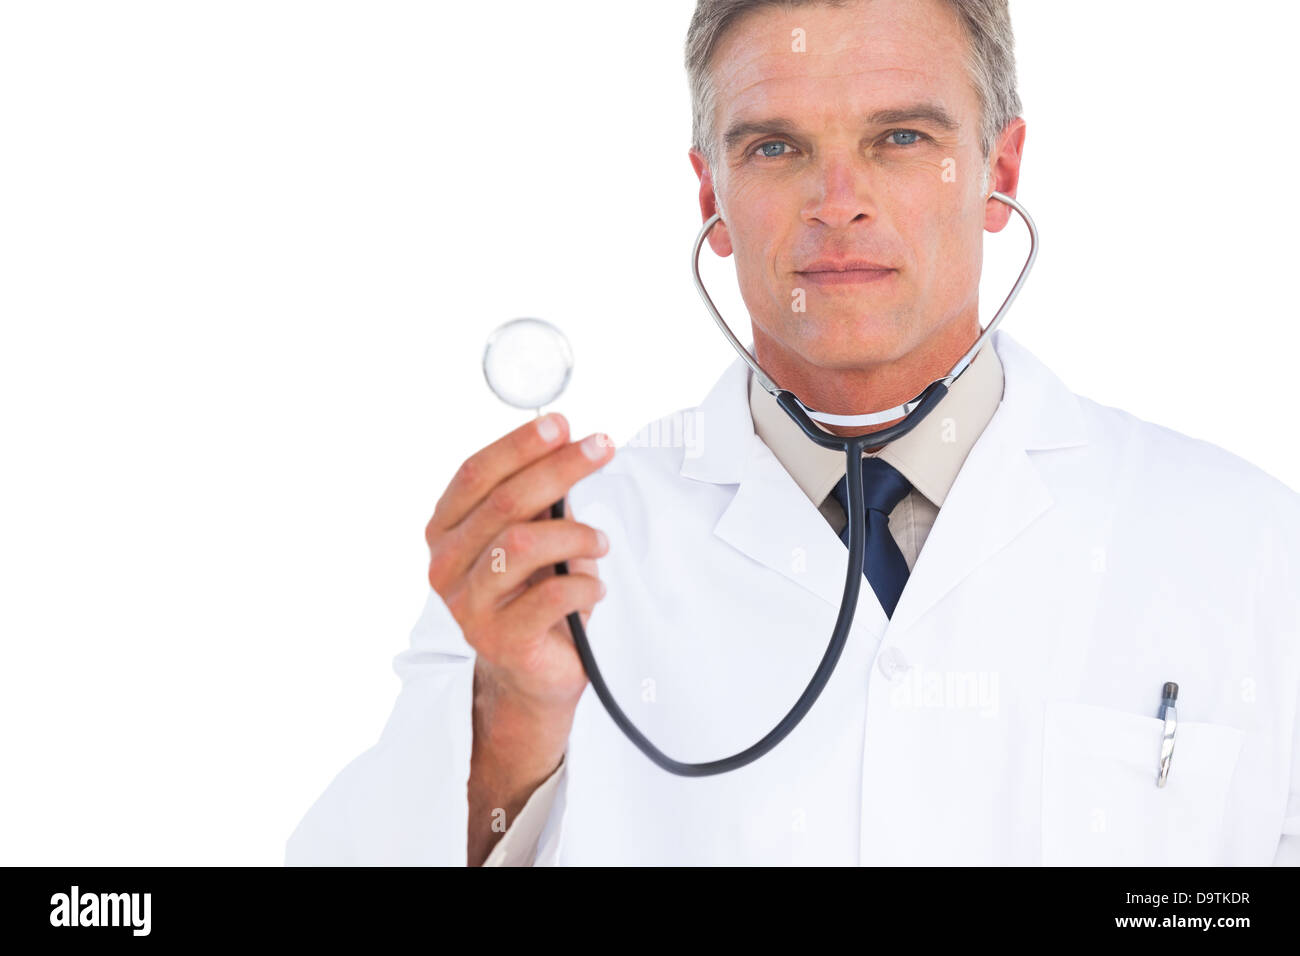 Doctor with stethoscope Banque D'Images